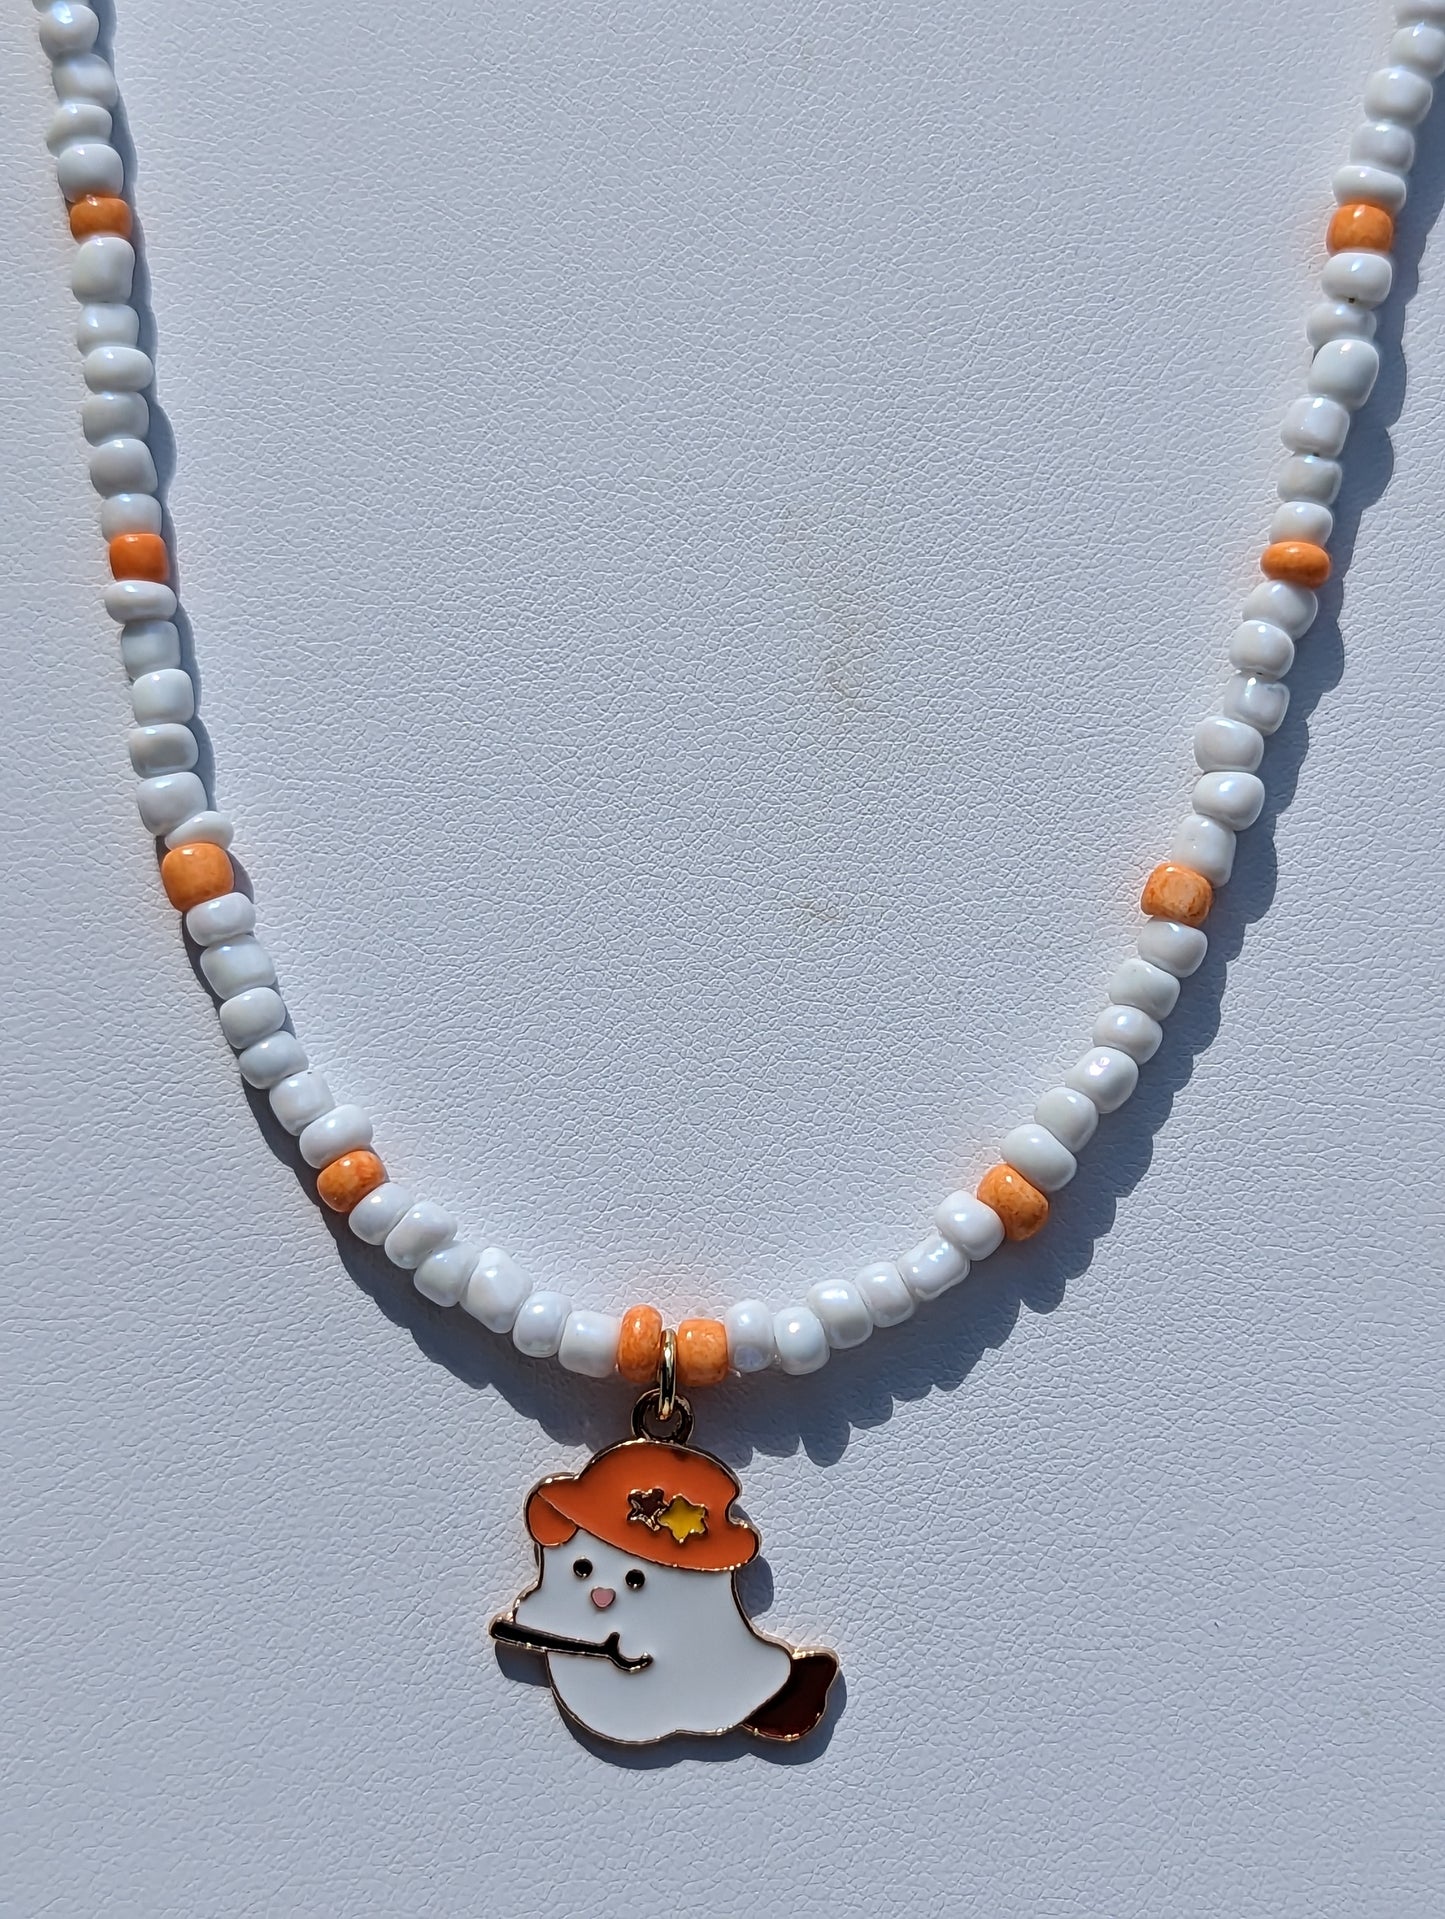 Friendly Ghost Charm on Beaded Necklace